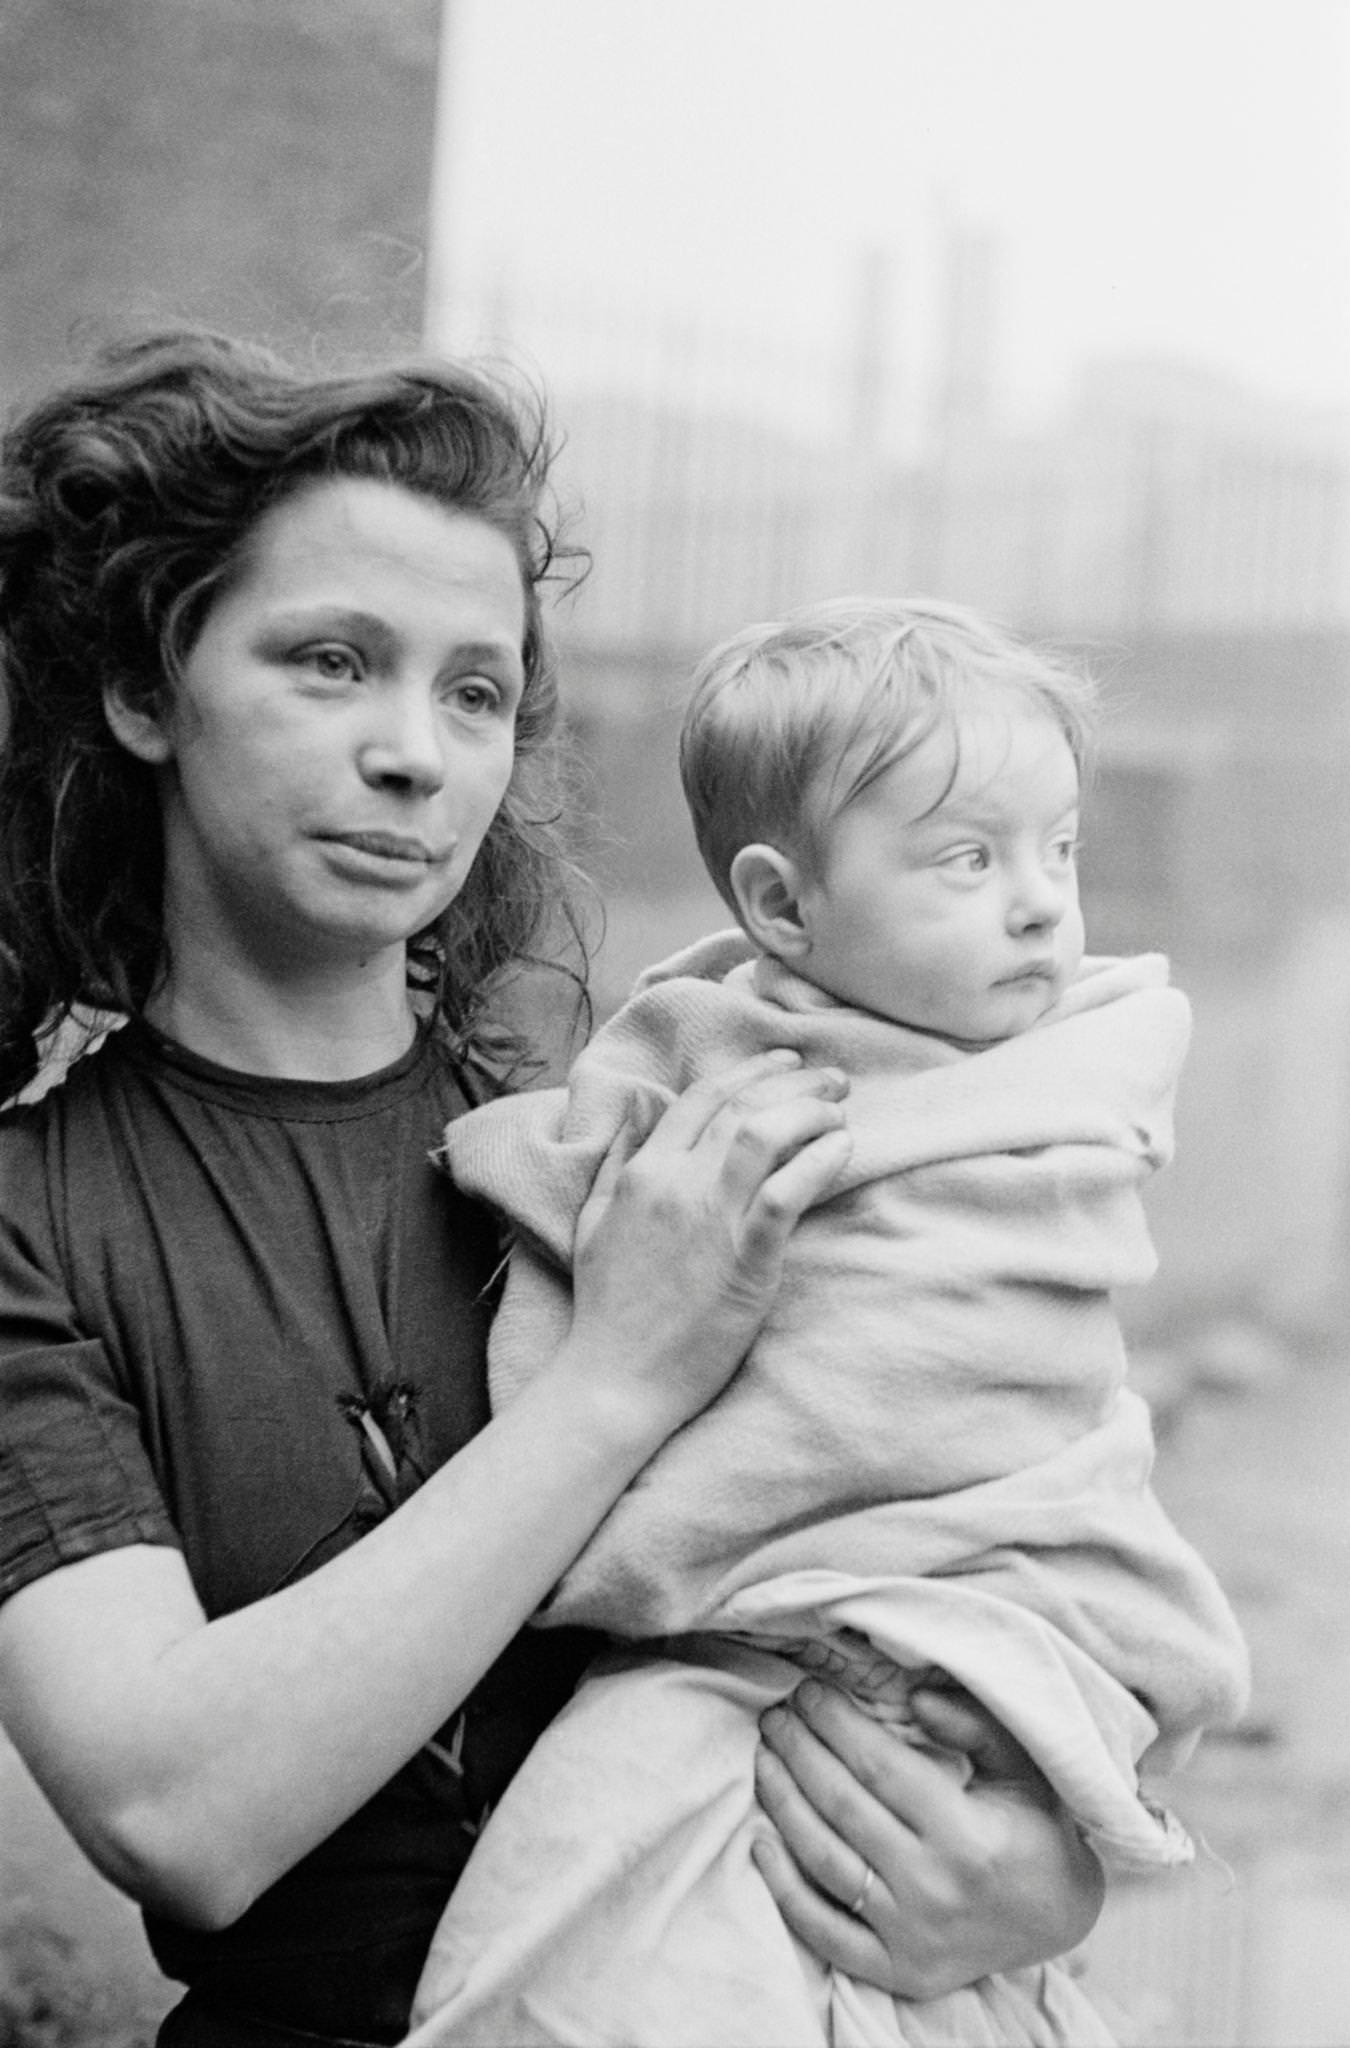 A young woman holding a baby wrapped in a blanket in the Gorbals, a slum district of Glasgow, 1948.